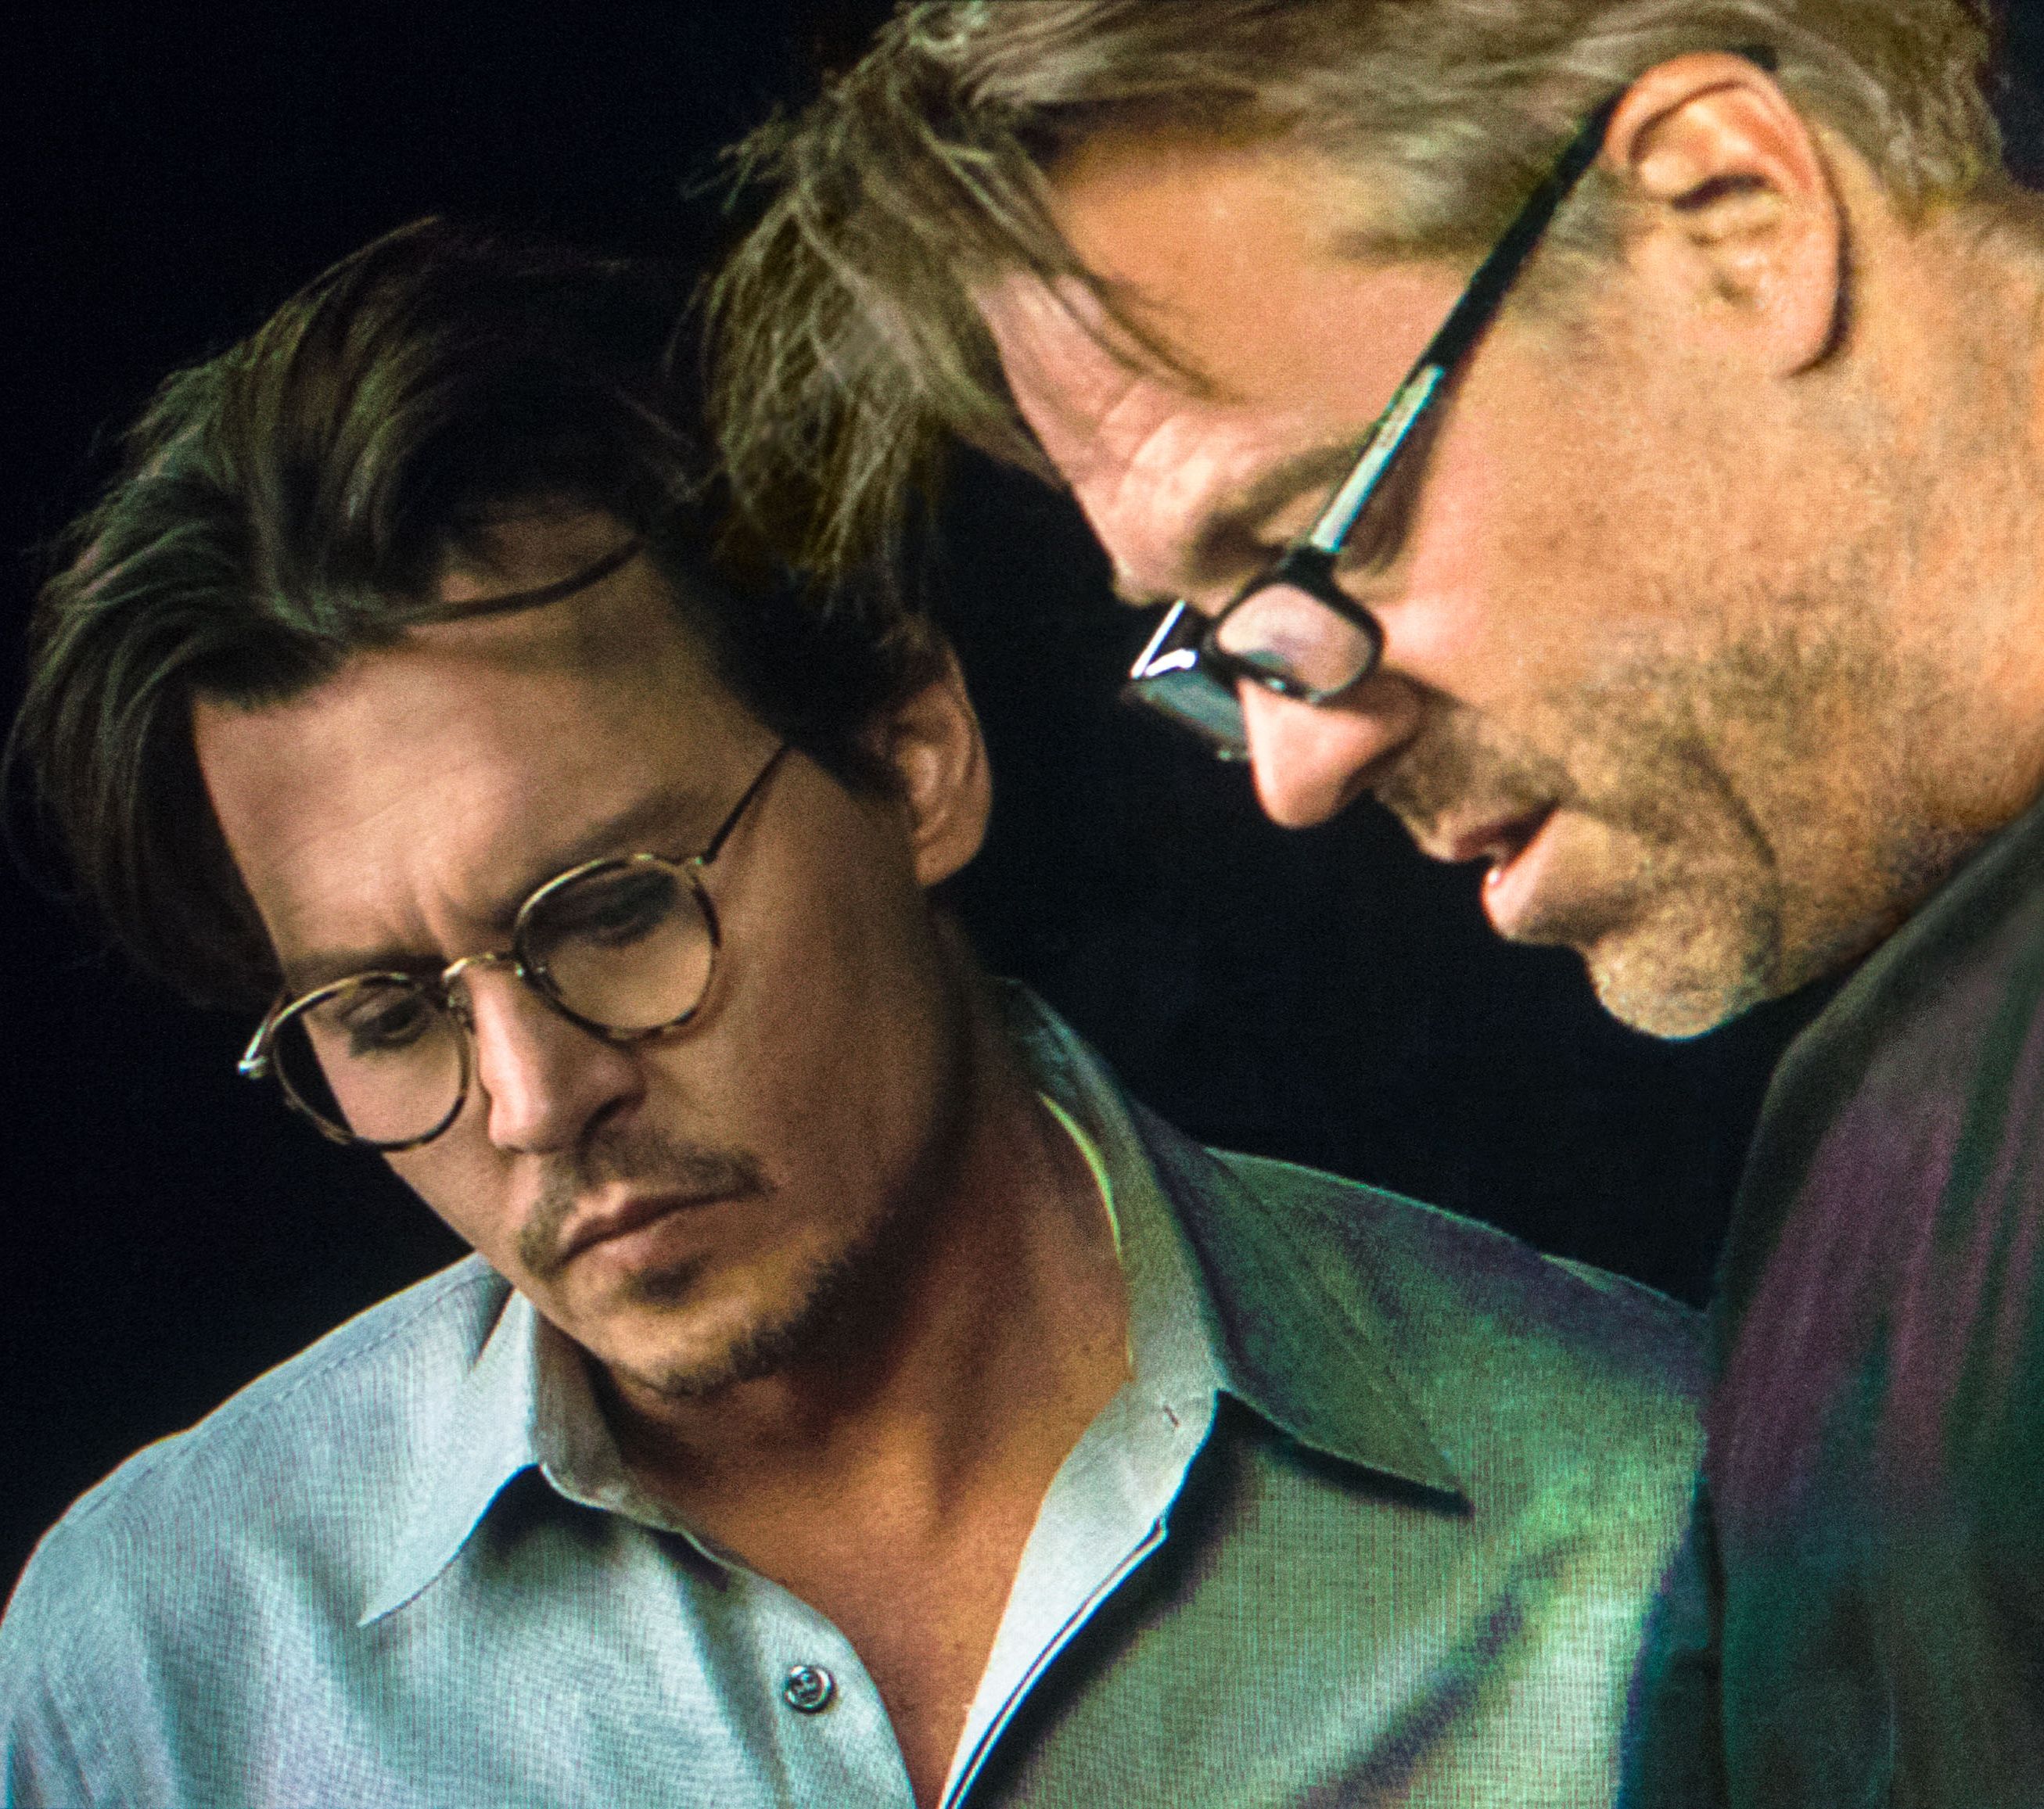 Johnny Depp and Wally Pfister working on Transcendence